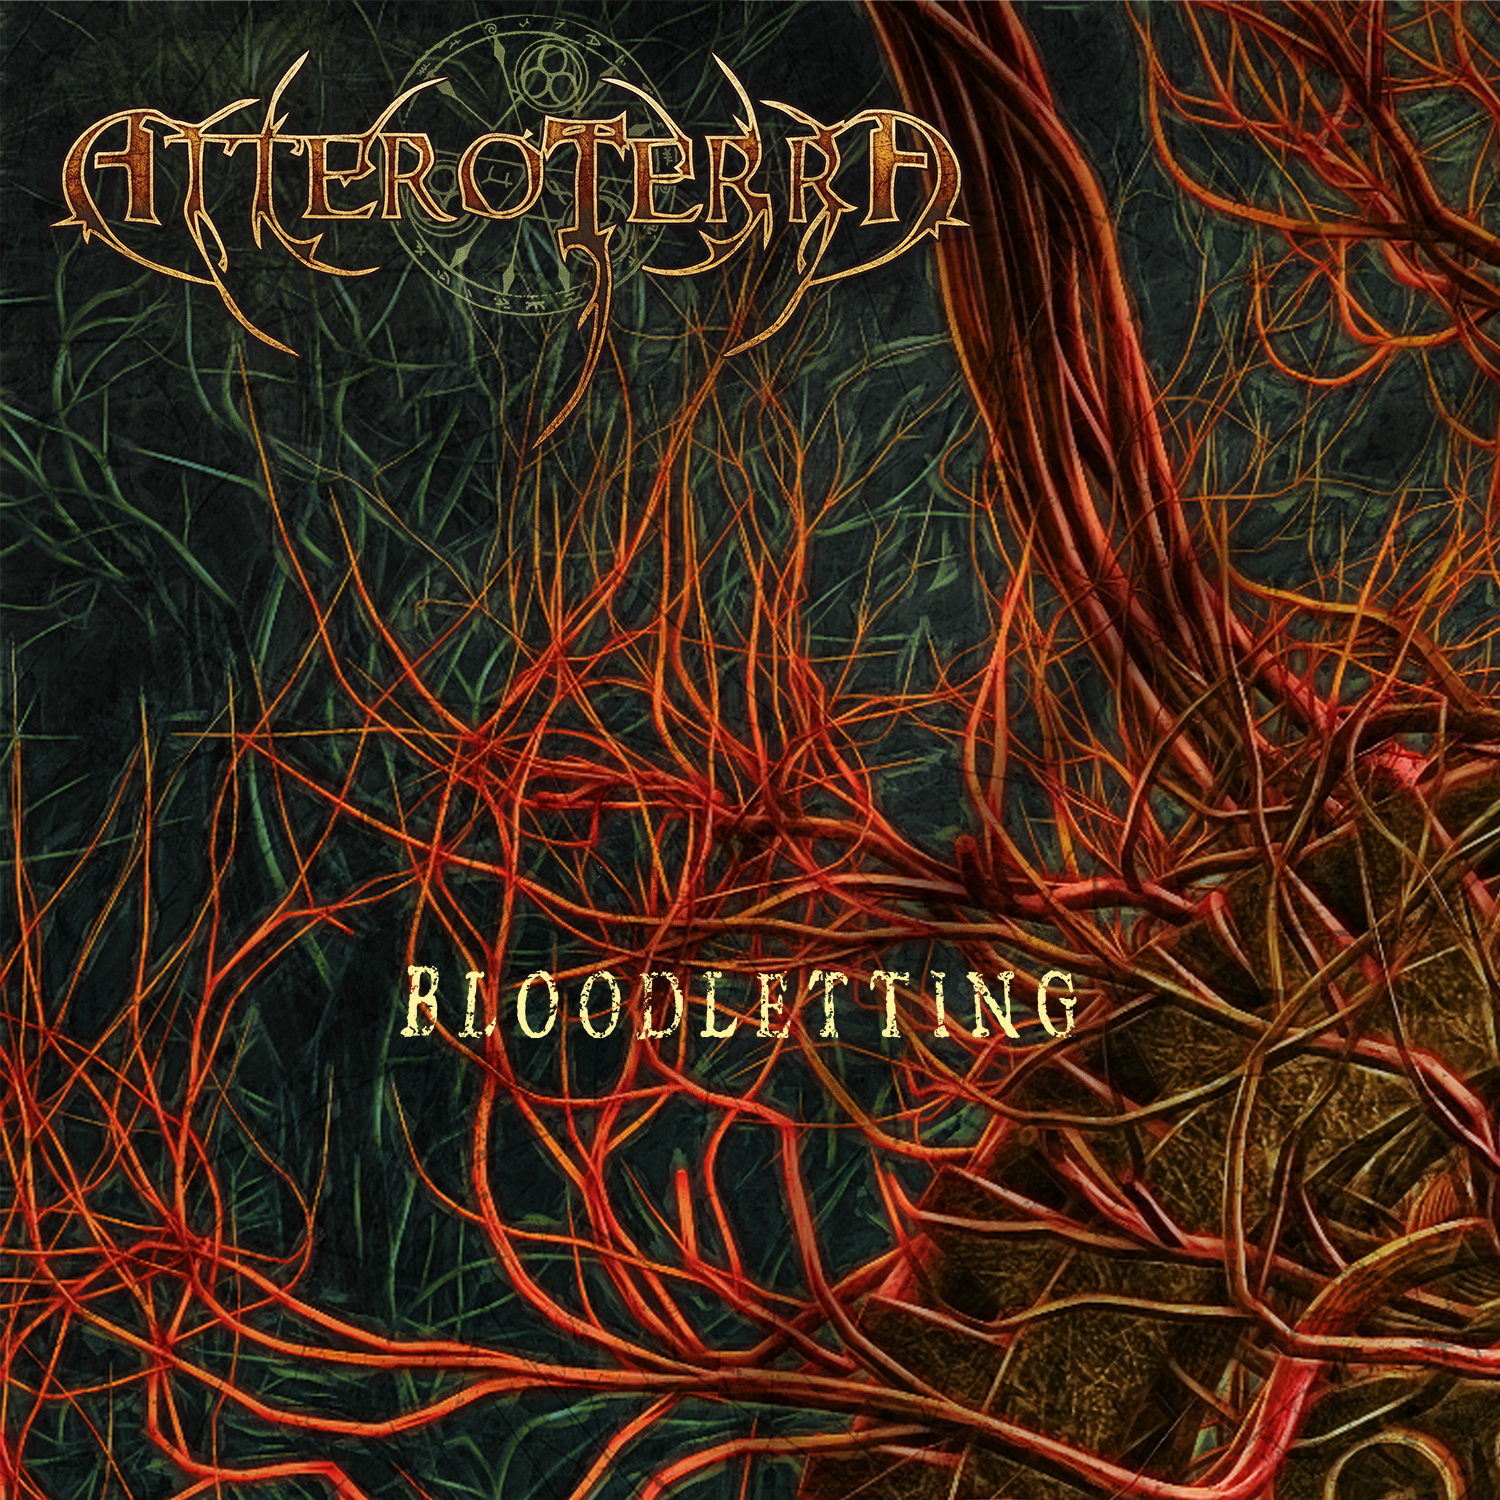 New Single “Bloodletting”